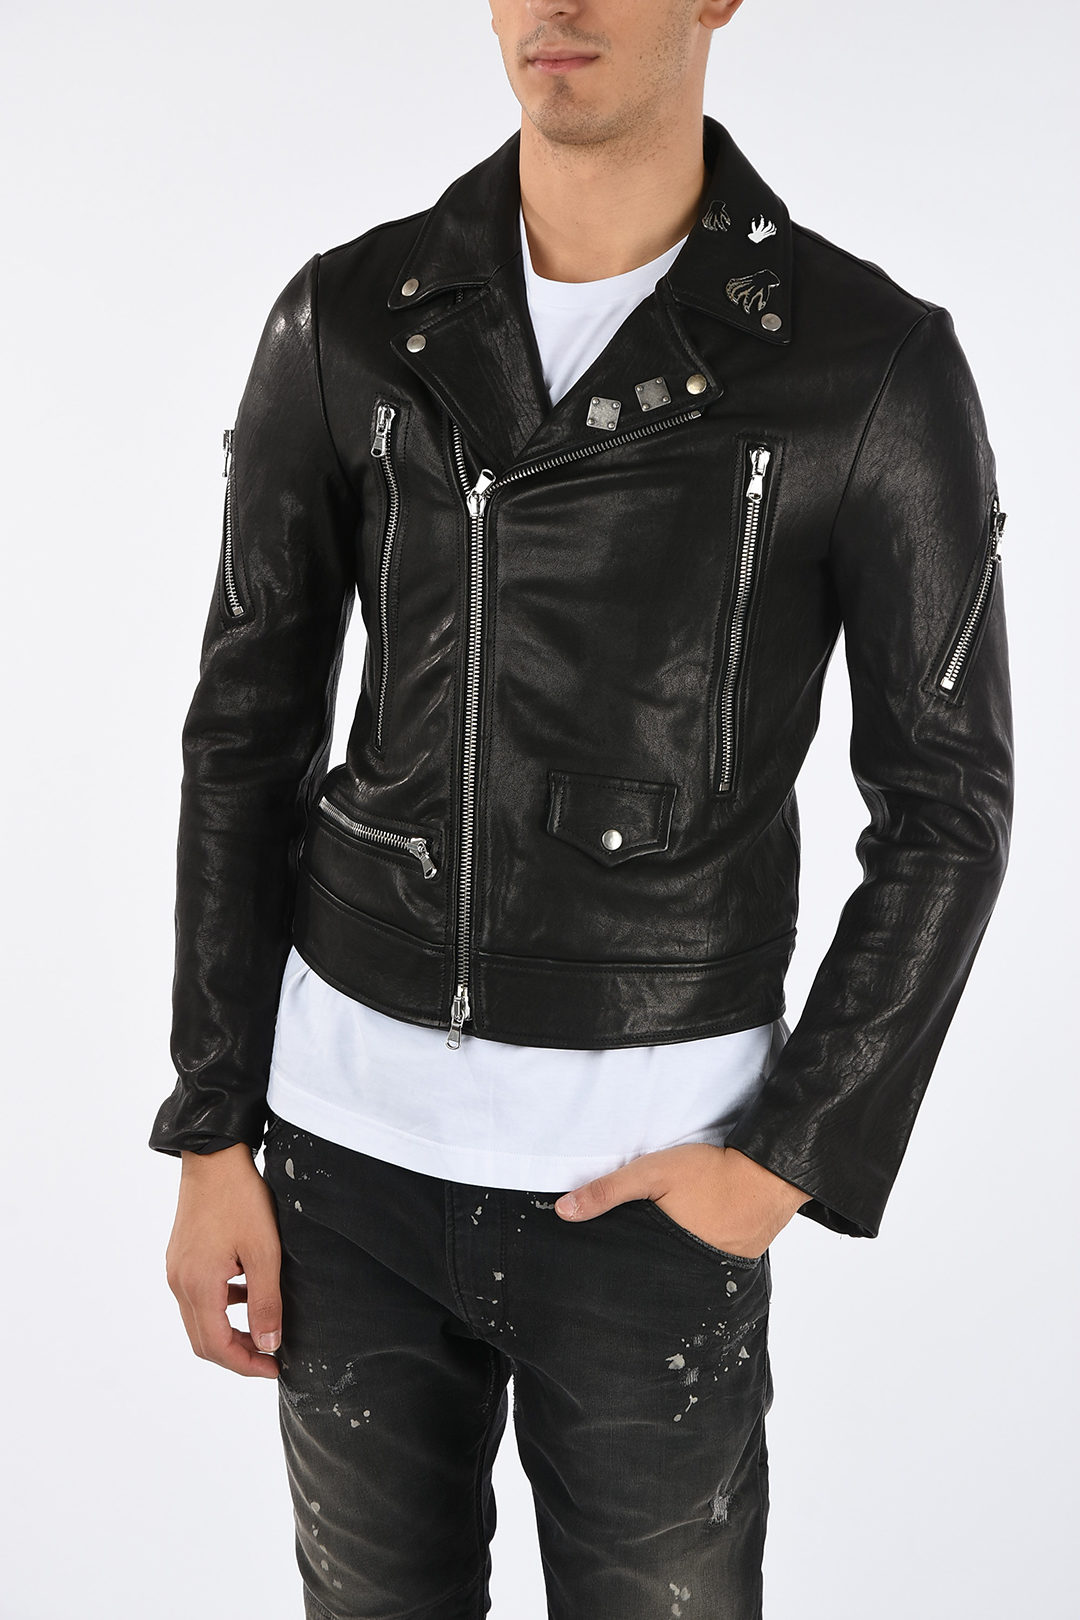 Diesel BLACK GOLD Leather L-PERF Jacket with Pins men - Glamood Outlet